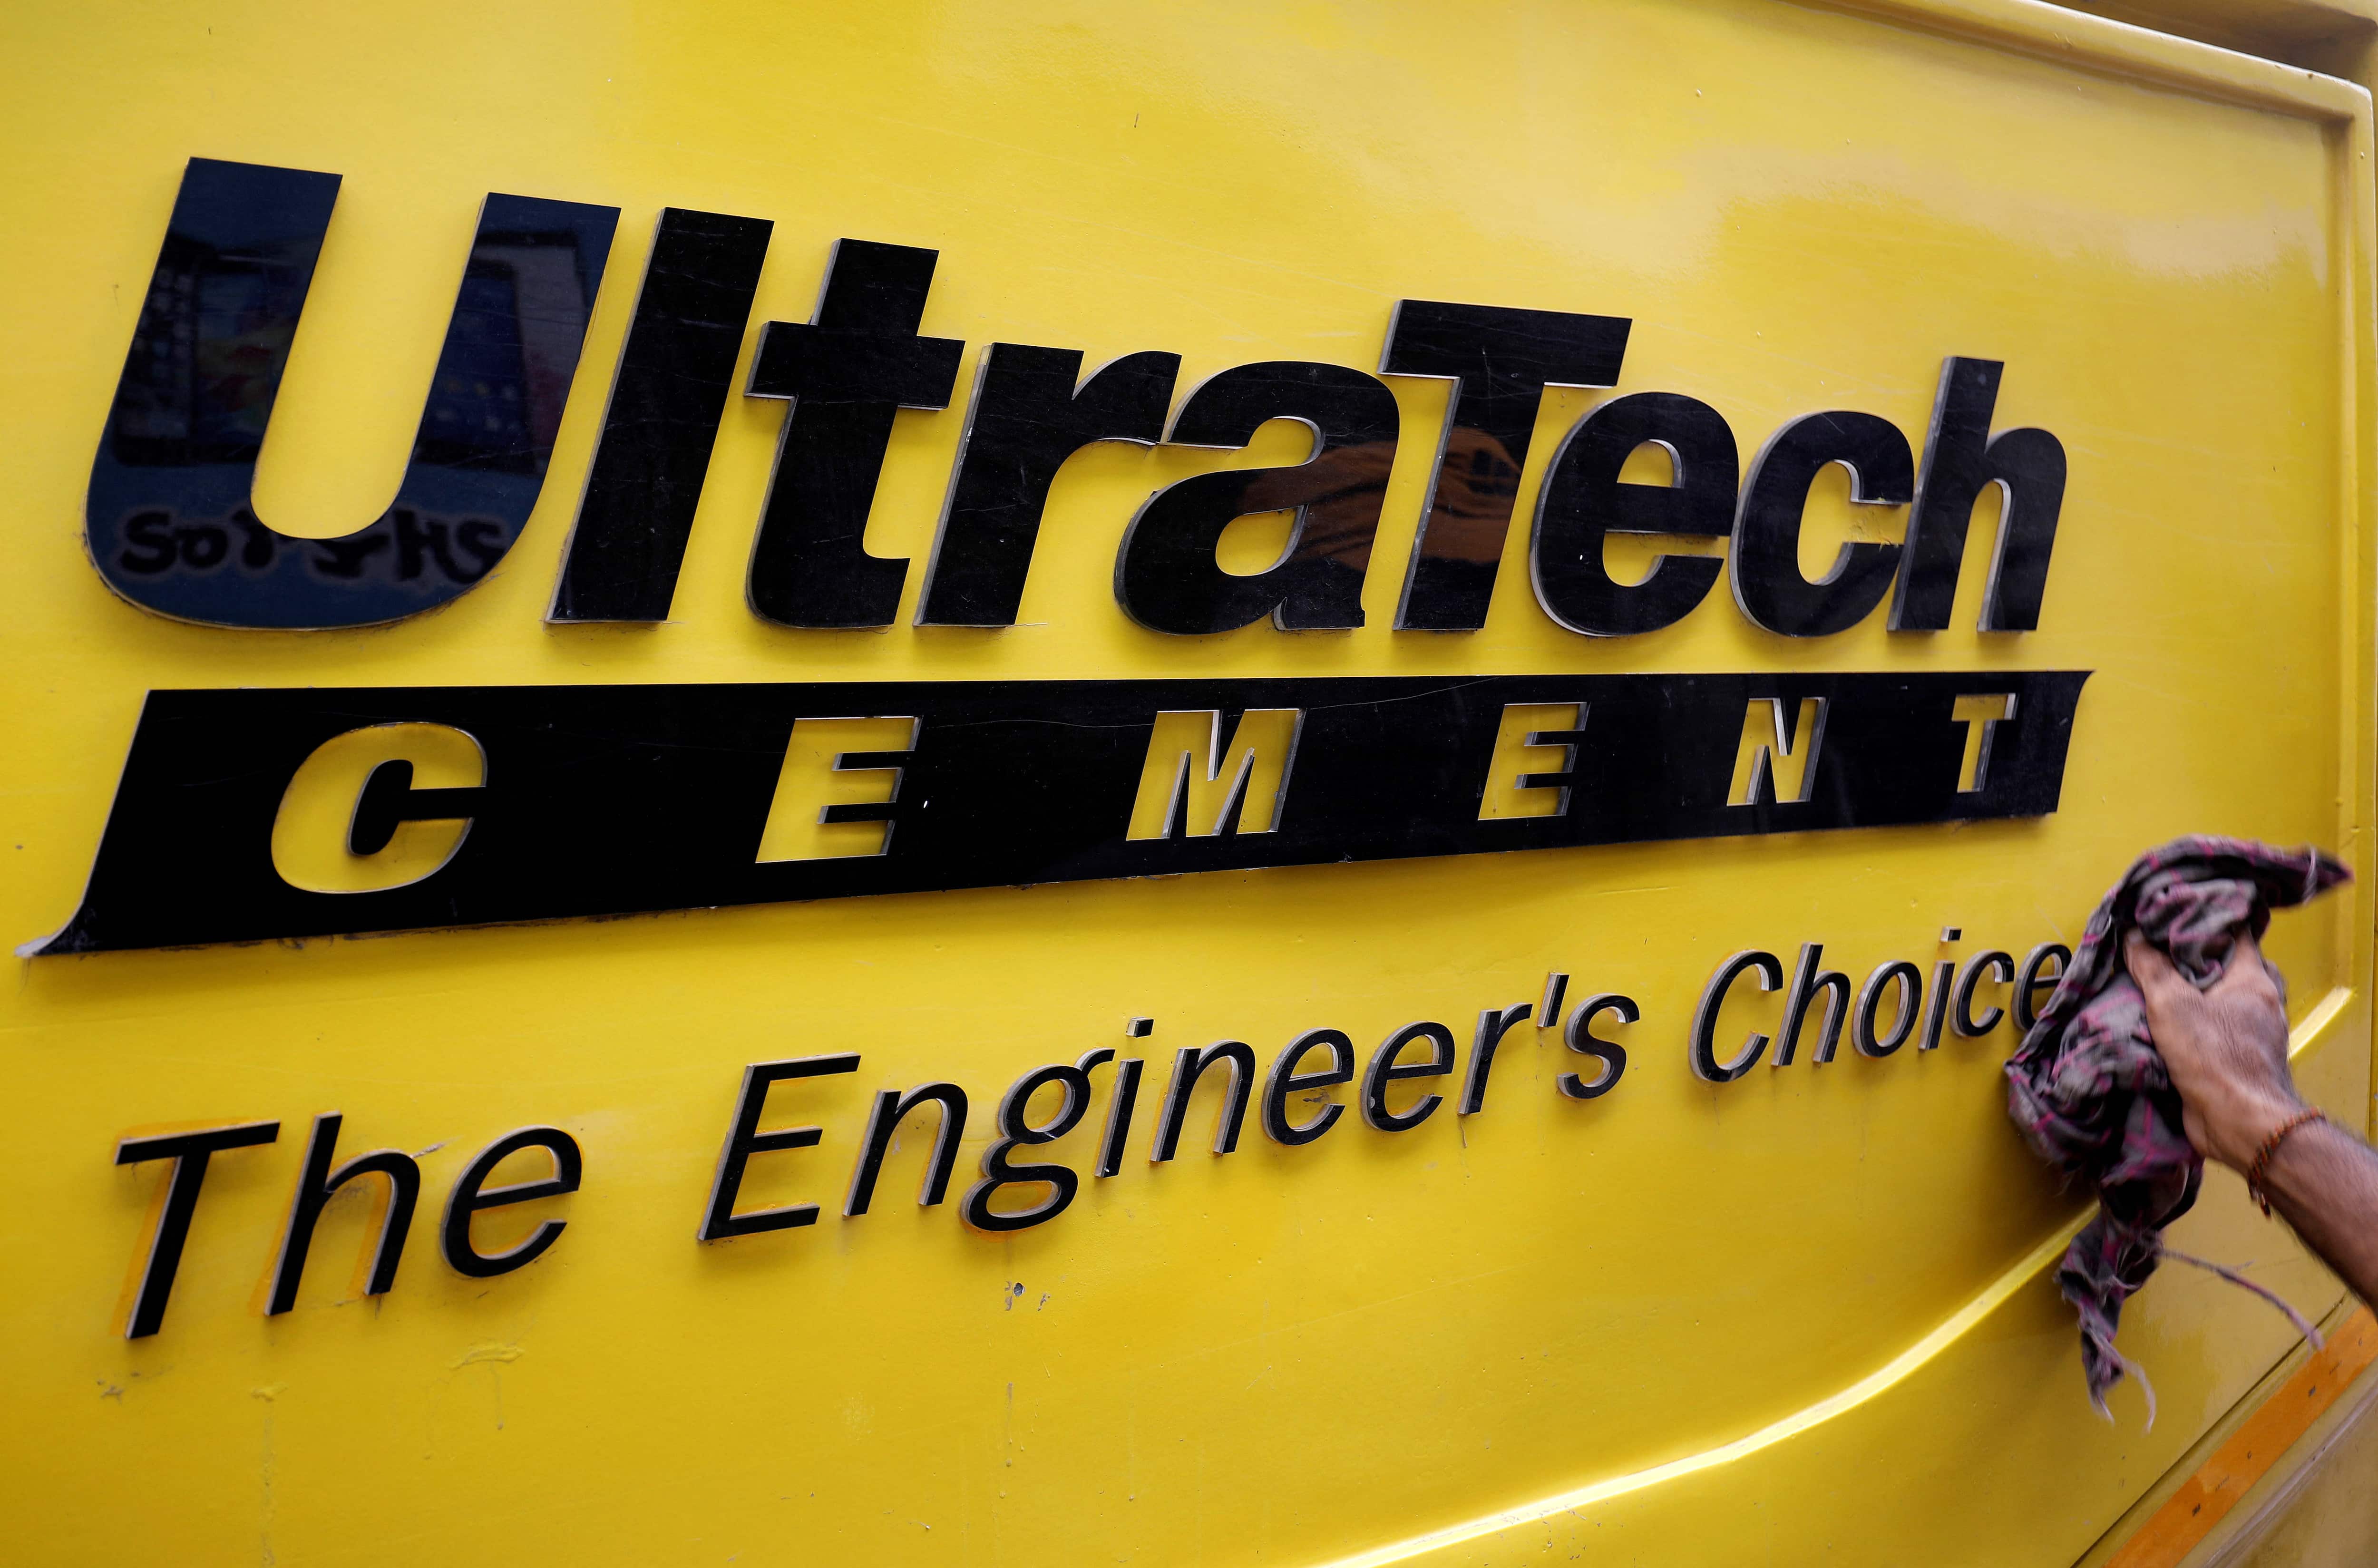 UltraTech Cement Associates With Mumbai City FC As Its Strength Partner |  The Fan Garage (TFG)